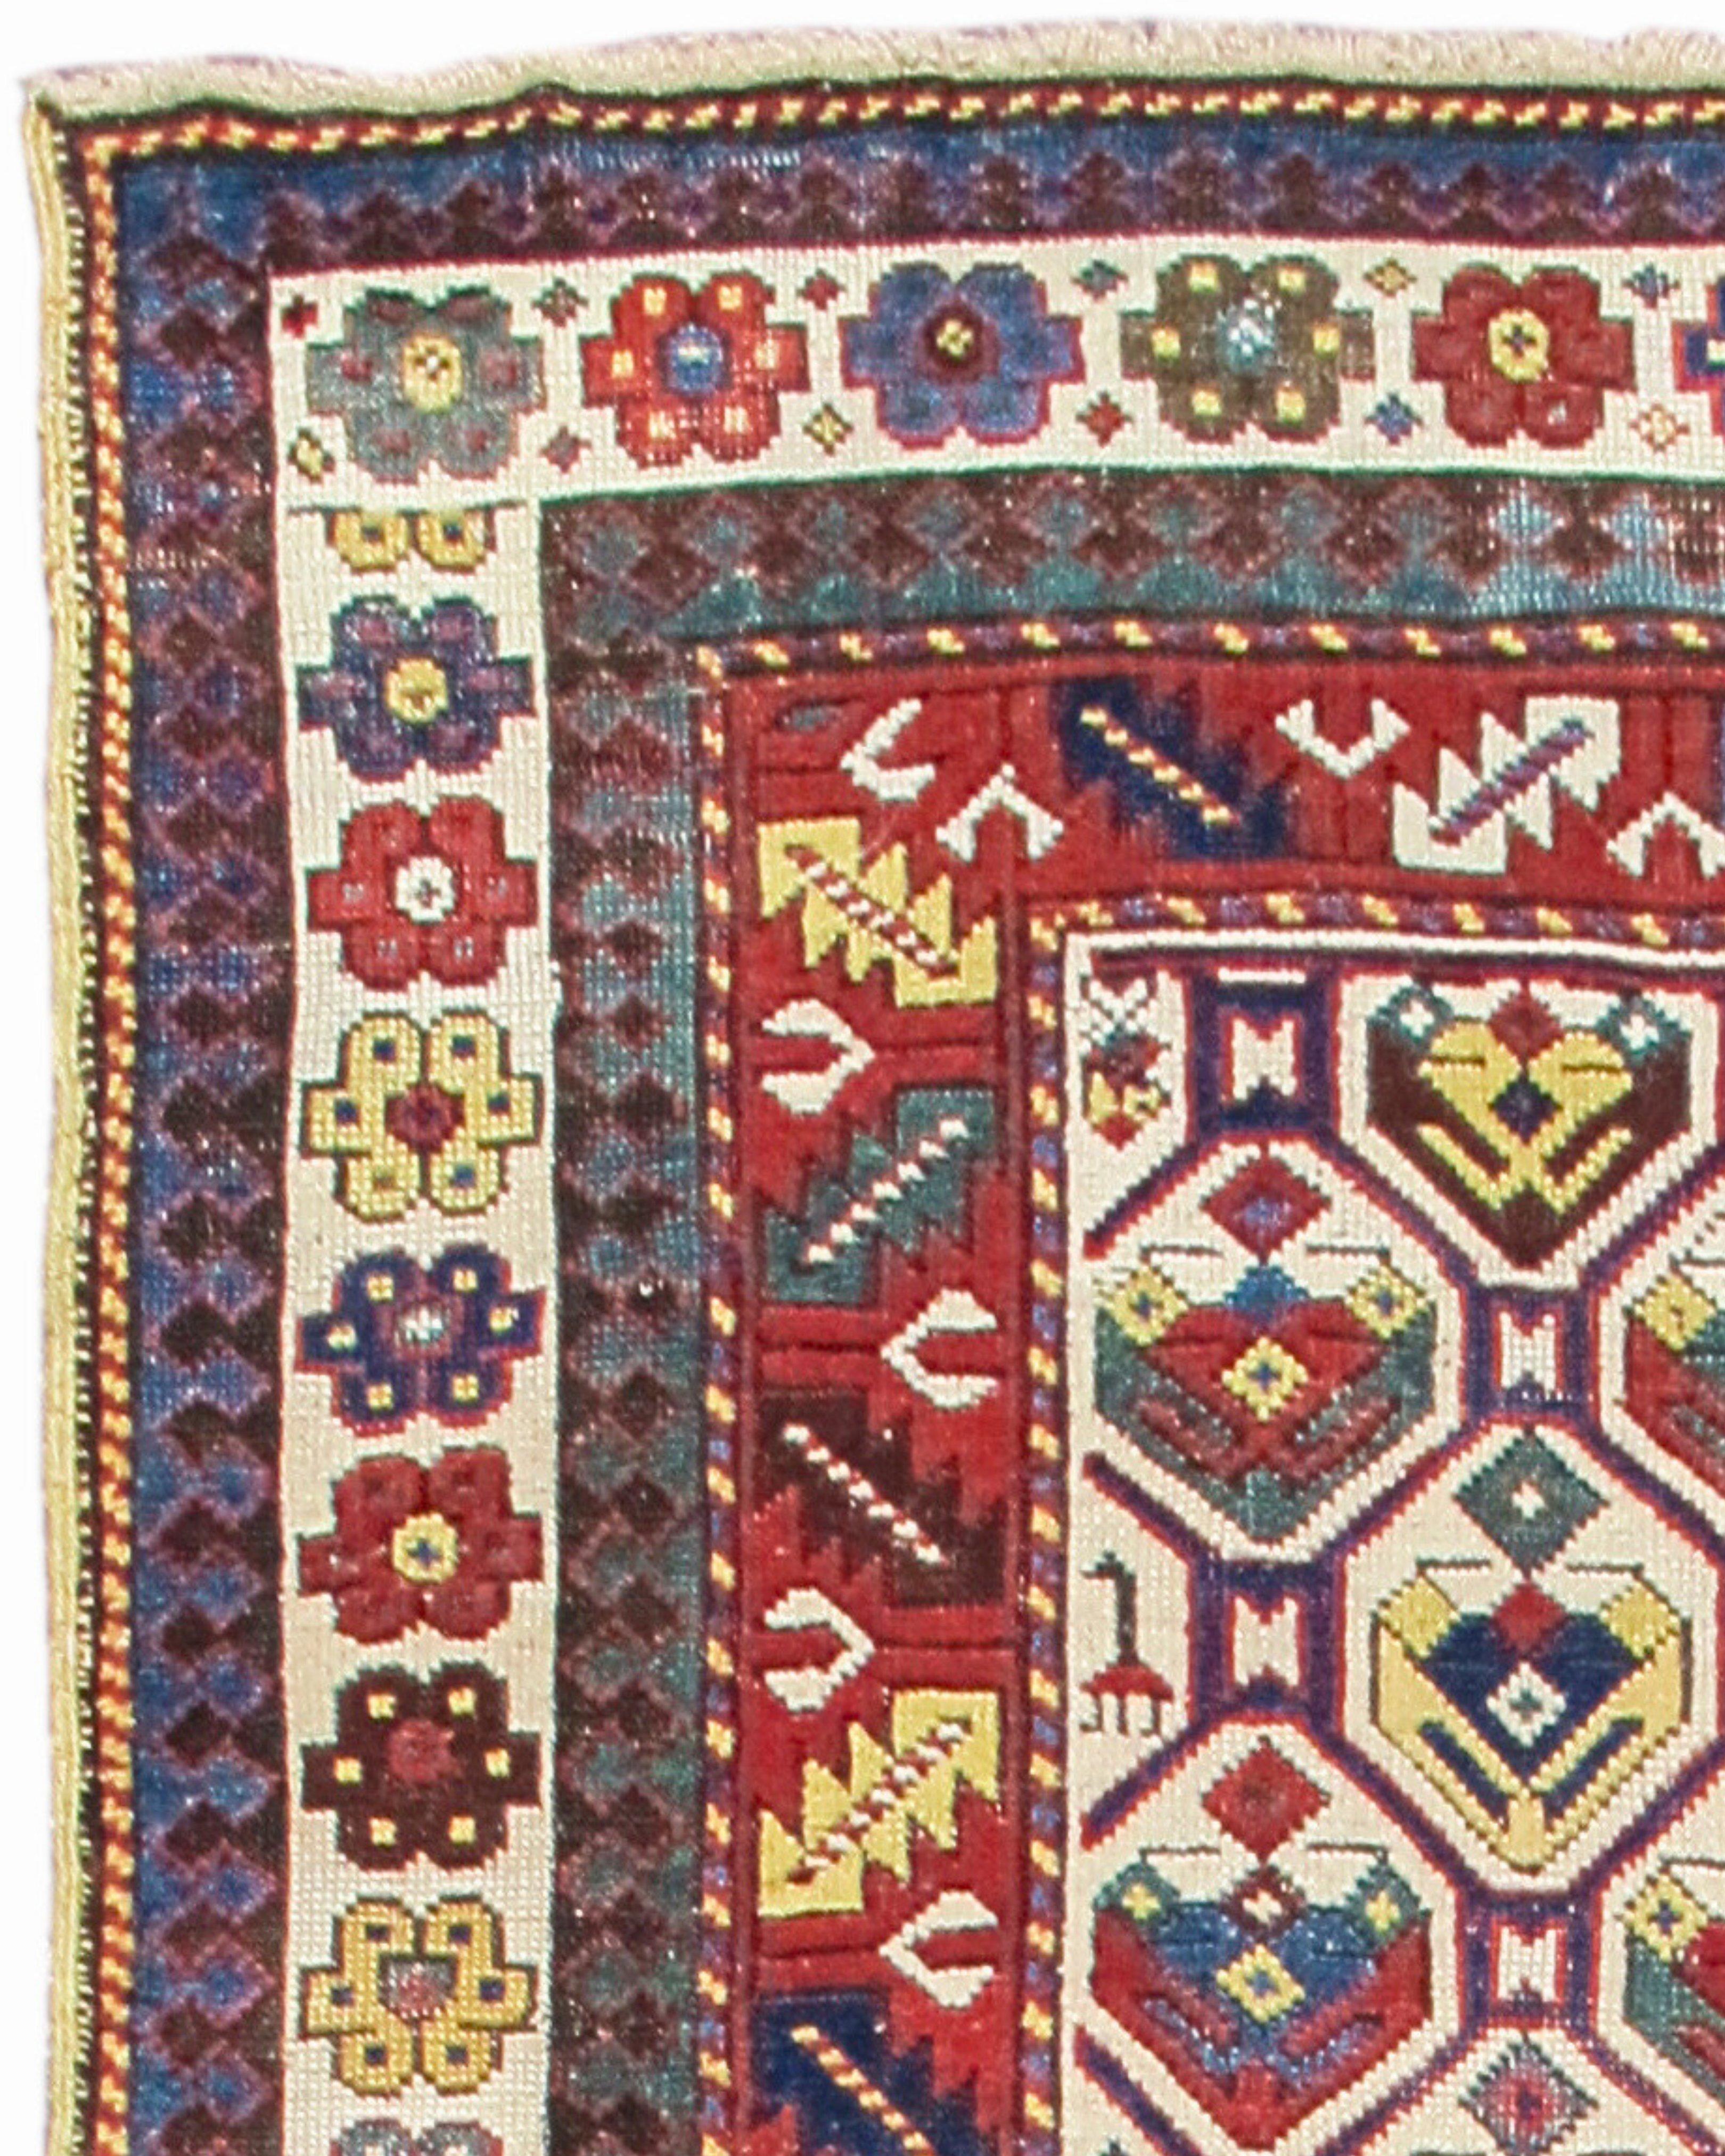 Hand-Woven Antique Karabagh Caucasian Rug, Late 19th Century For Sale